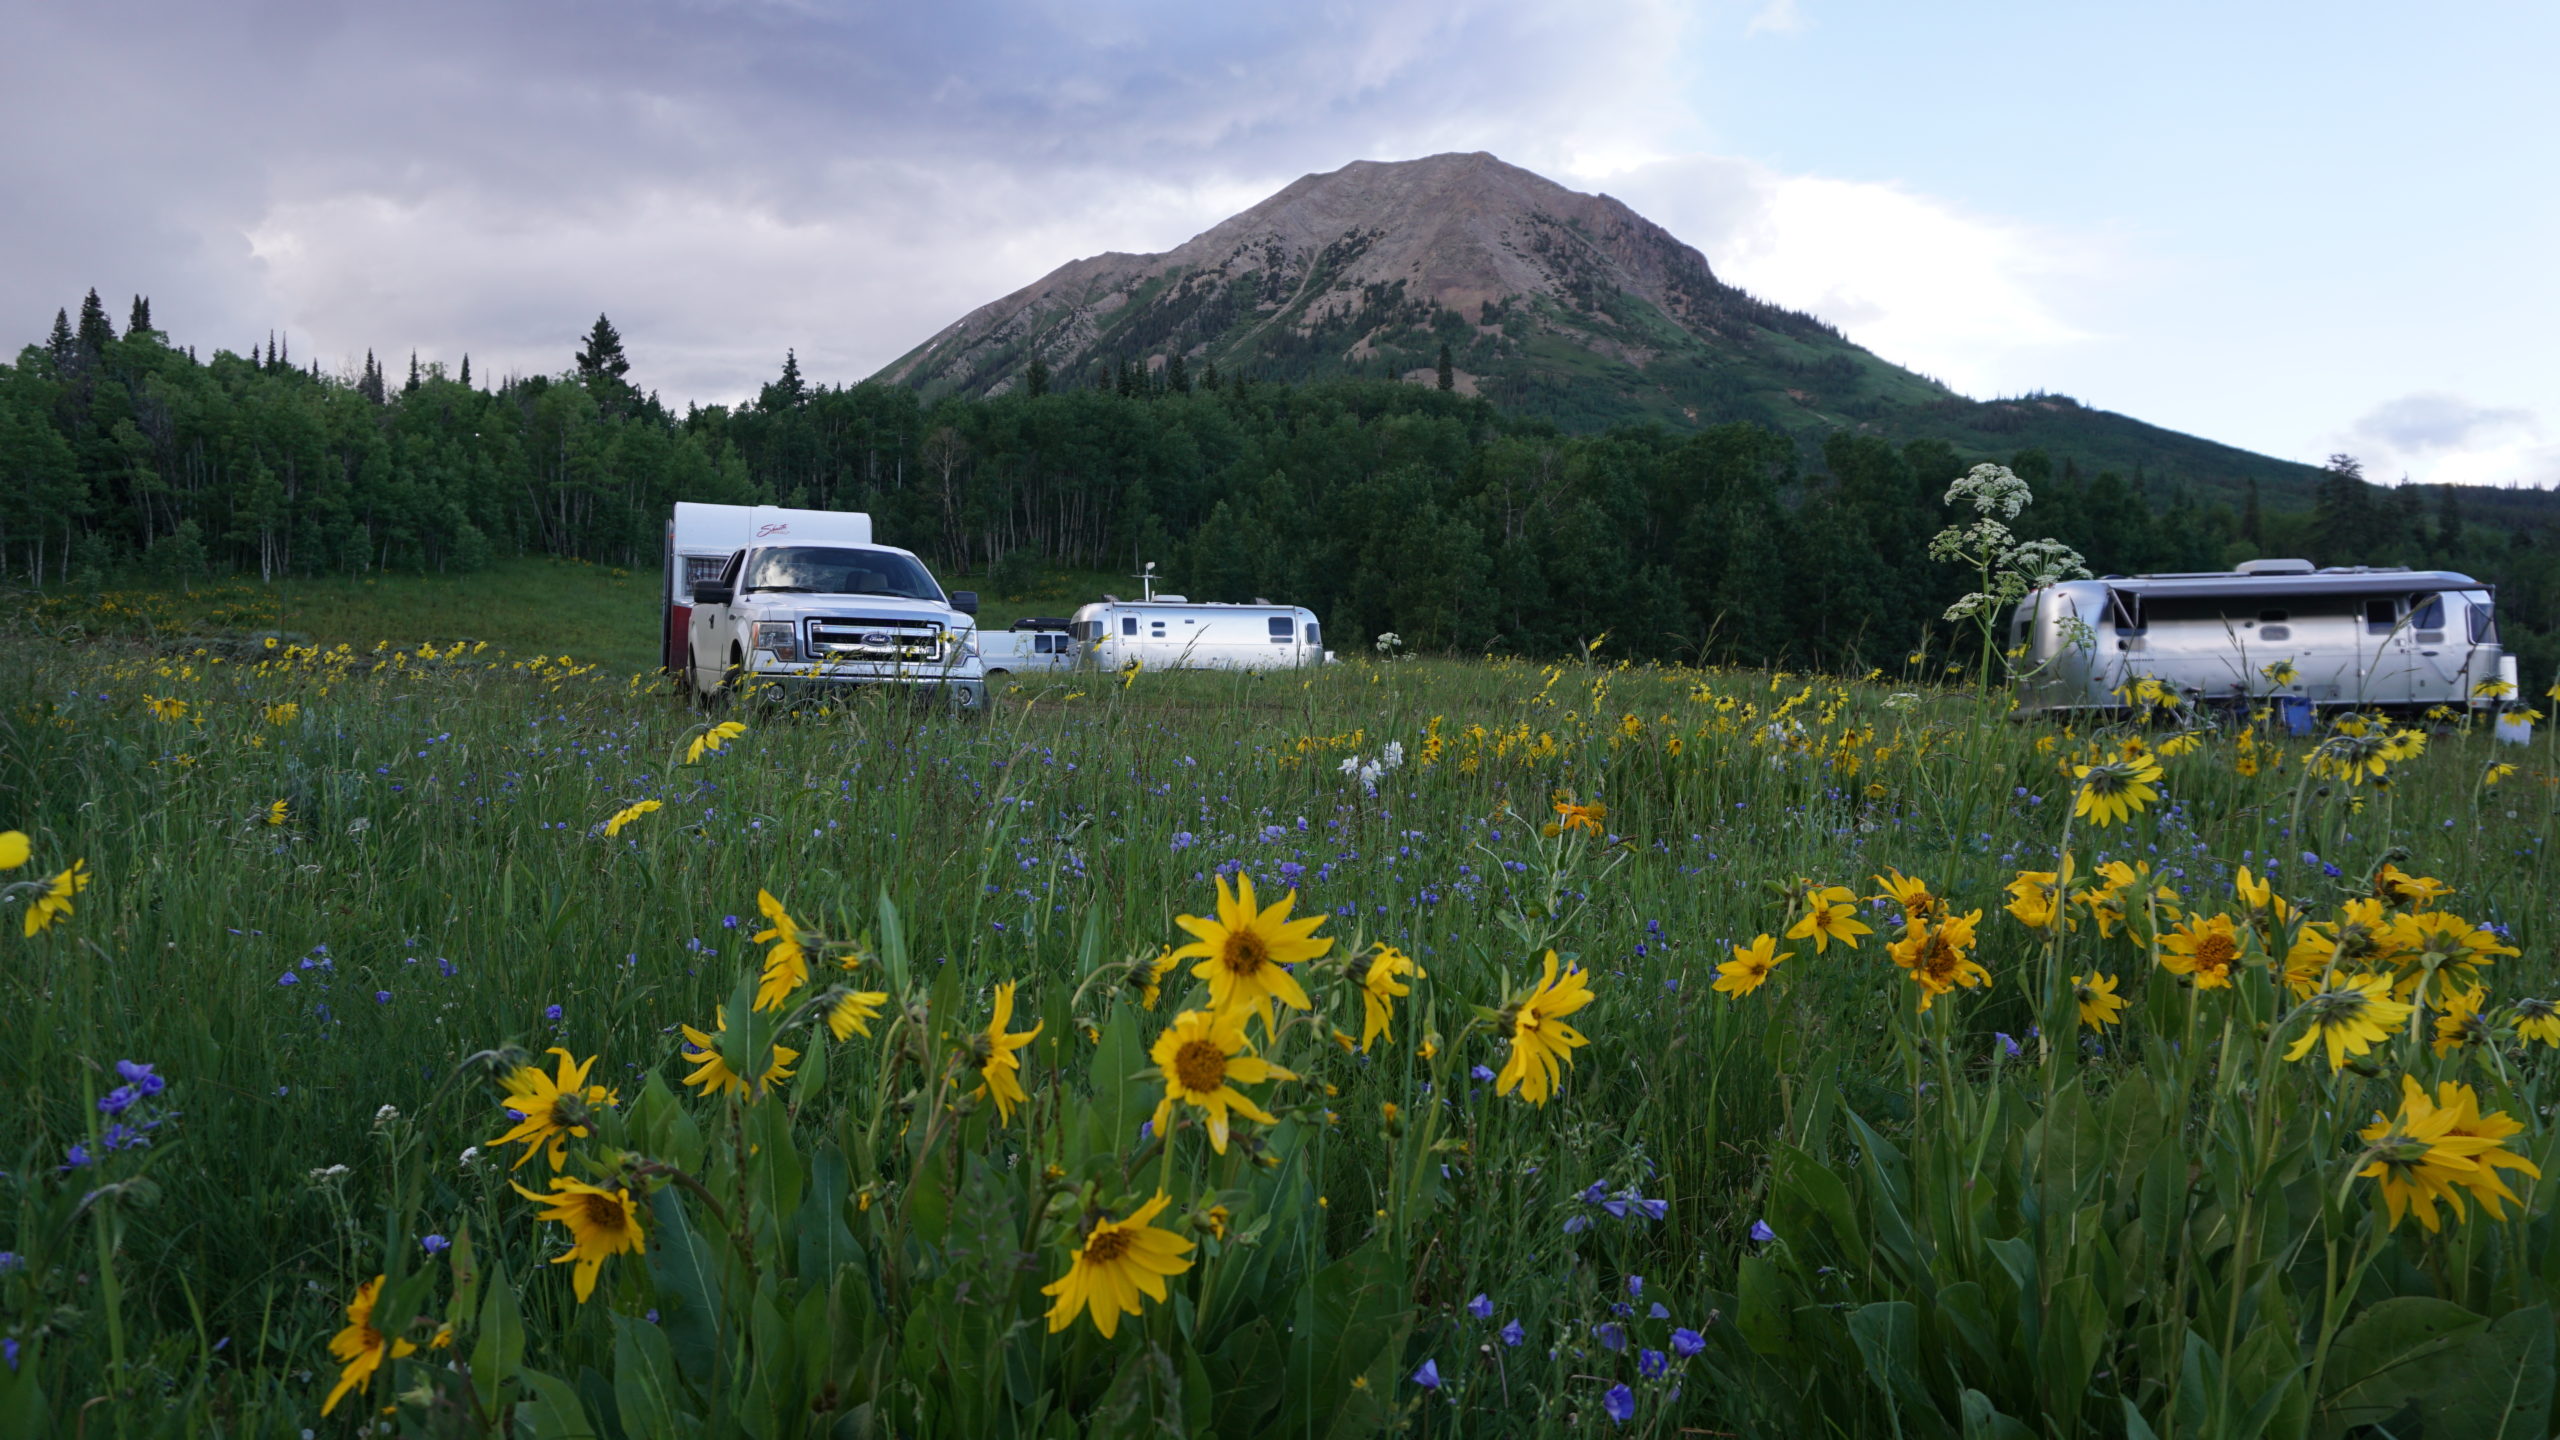 Three RV trailers parked in wildflower field with mountain in background